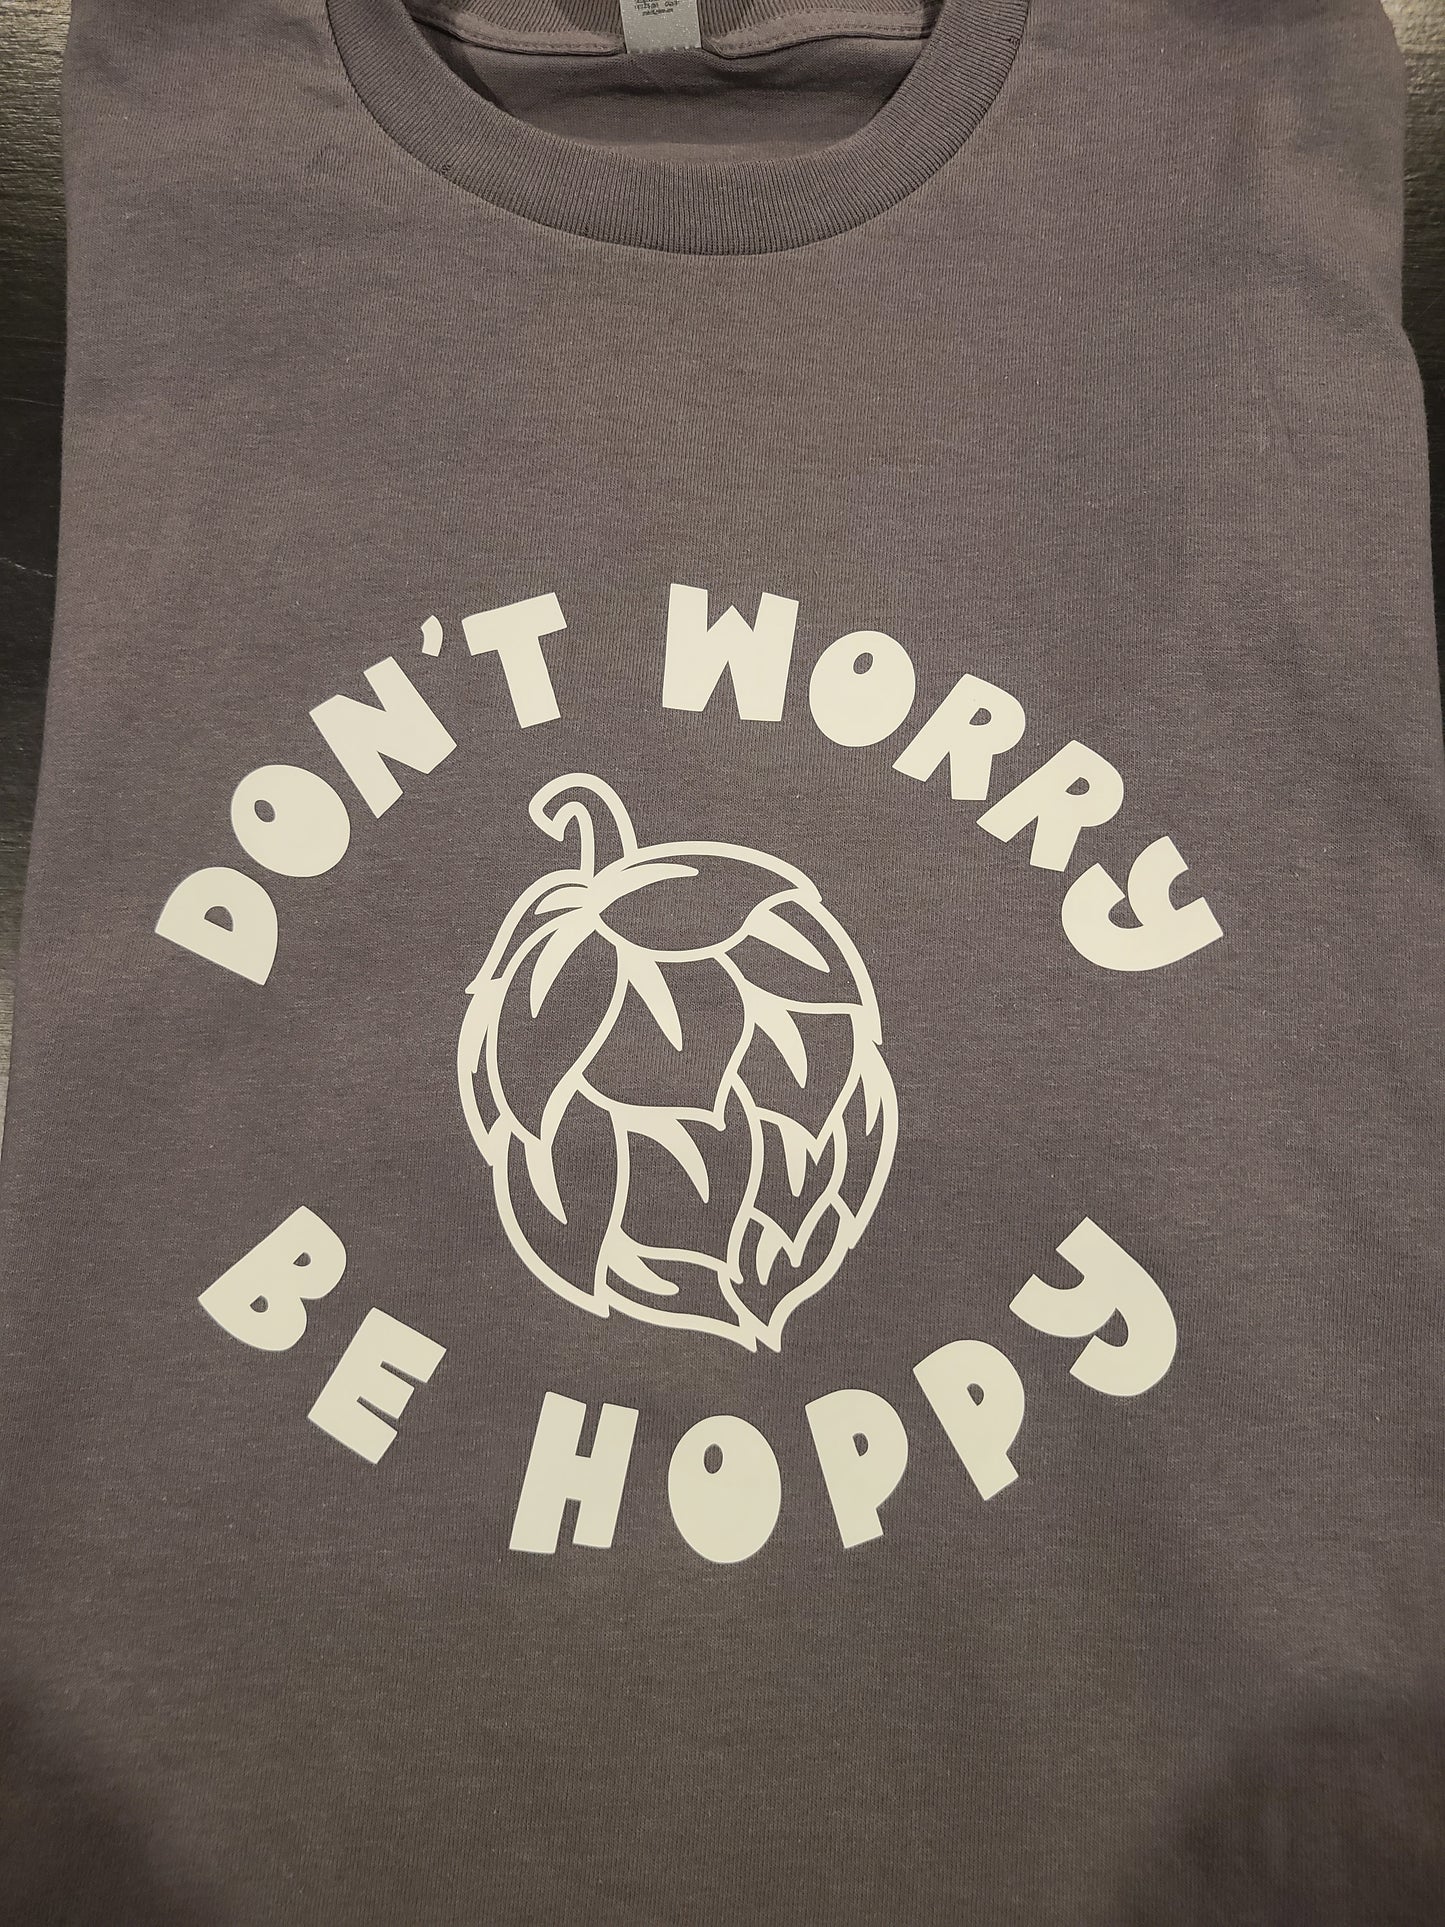 Don't Worry Shirt